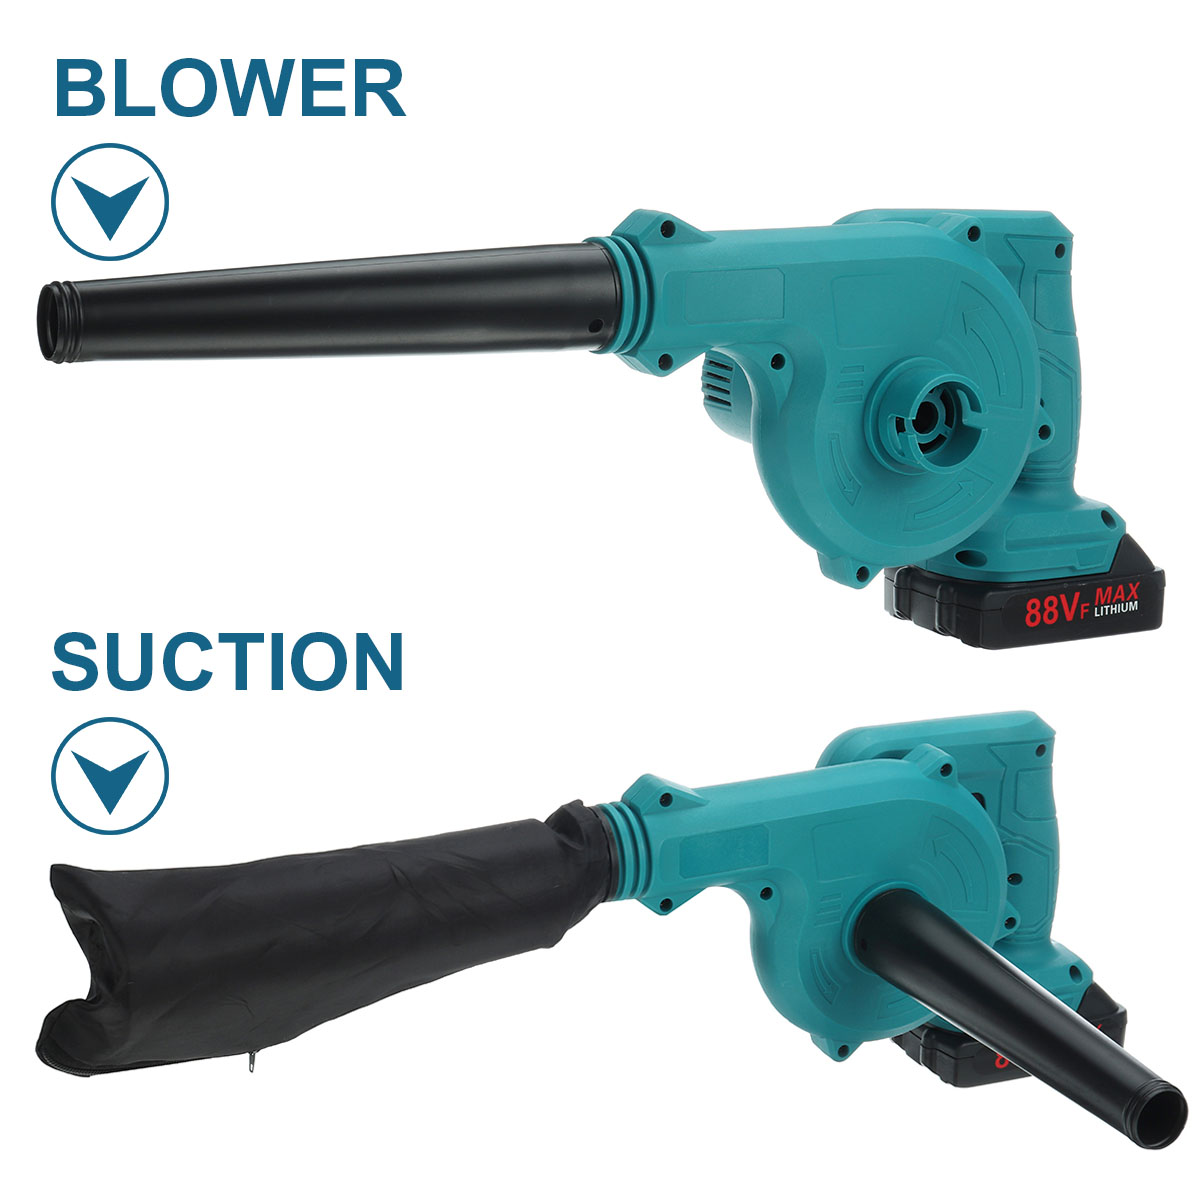 2-IN-1-Cordless-Electric-Air-Blower--Suction-Handheld-Leaf-Computer-Dust-Collector-Cleaner-Power-Too-1851240-9